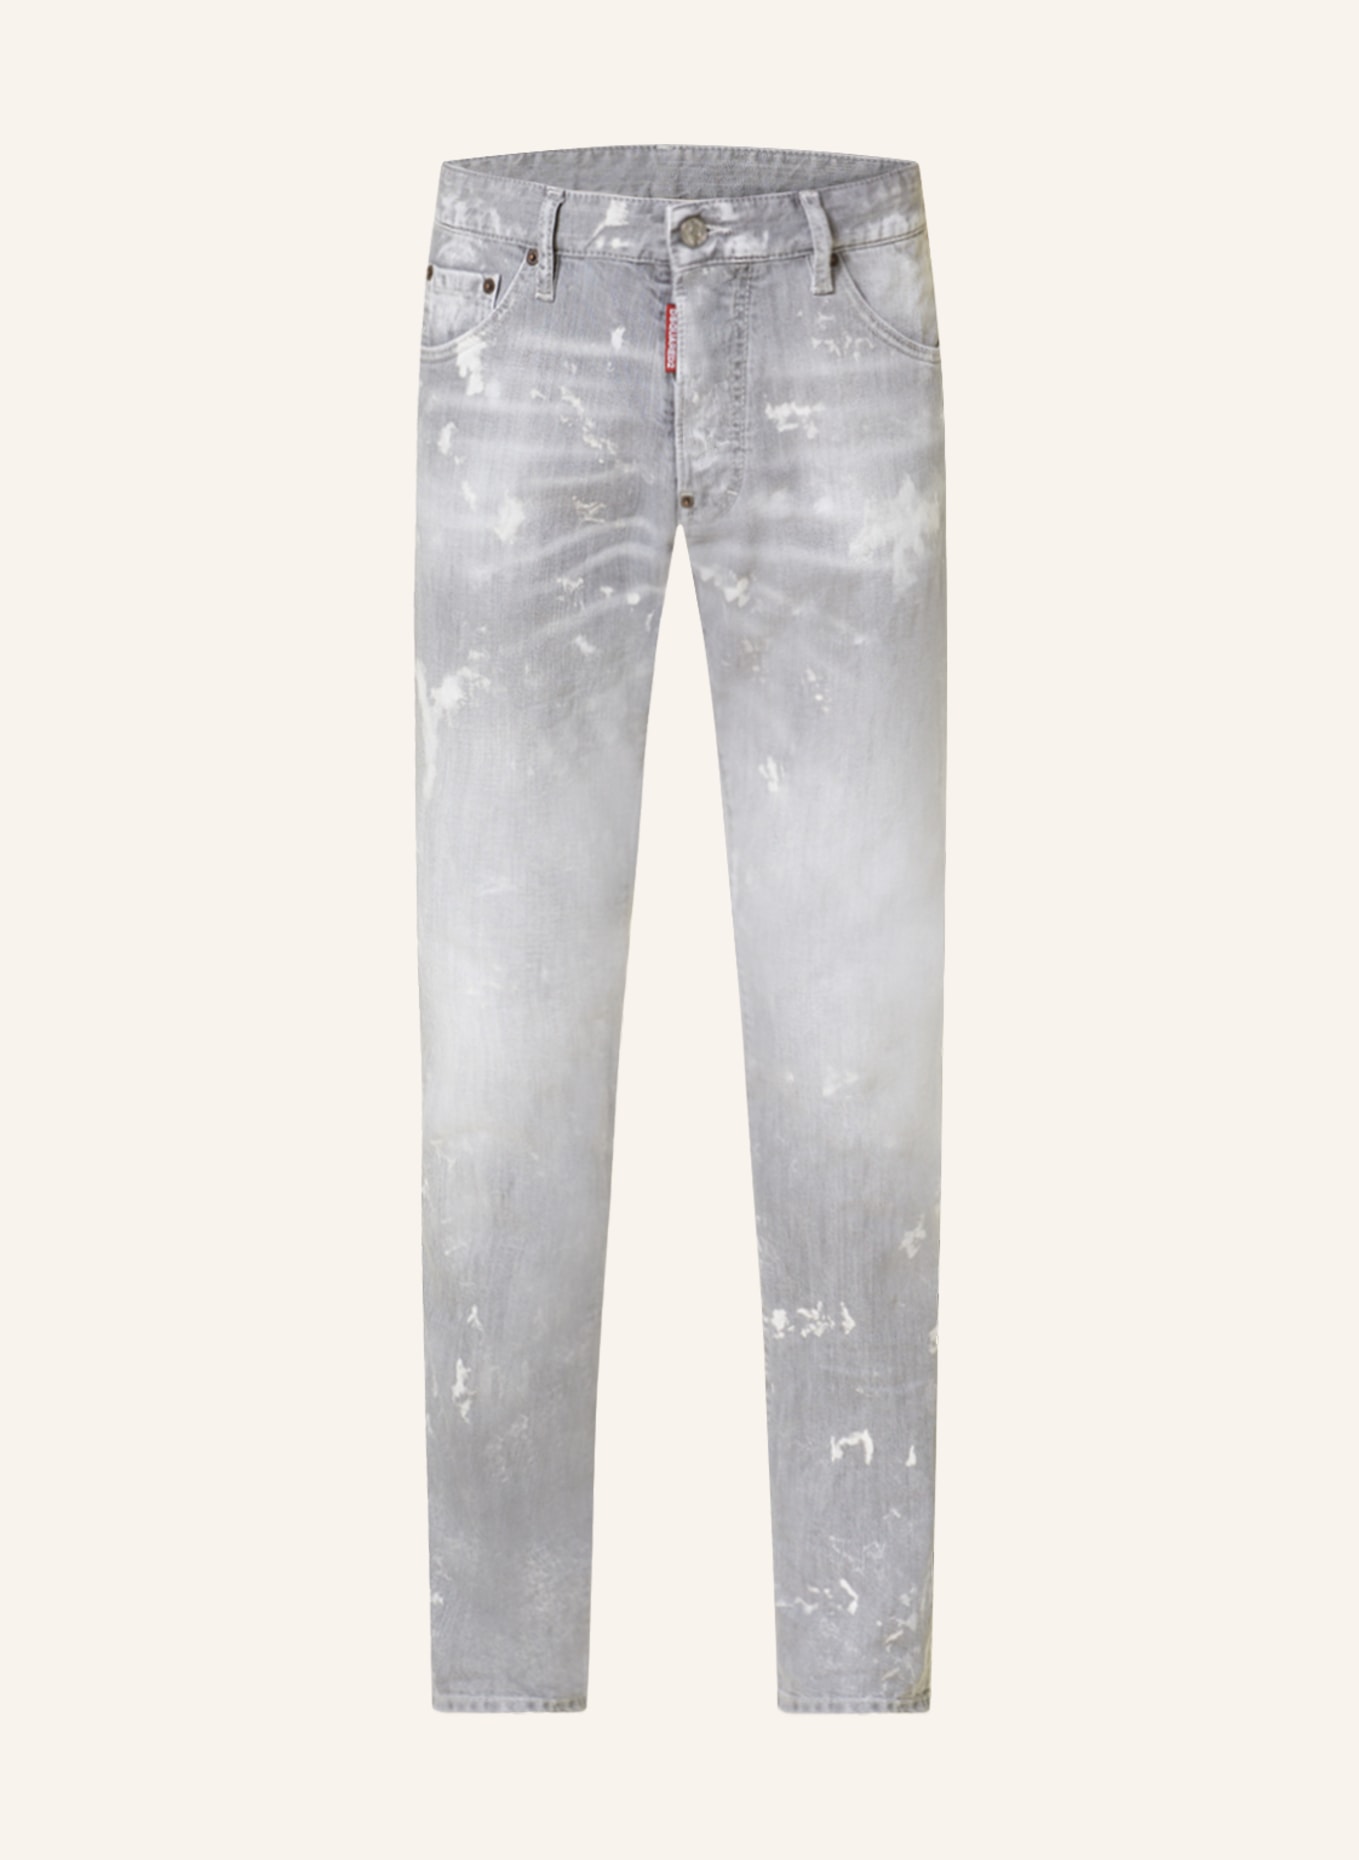 DSQUARED2 Jeans COOL GUY Extra Slim Fit, Farbe: 852 GREY (Bild 1)